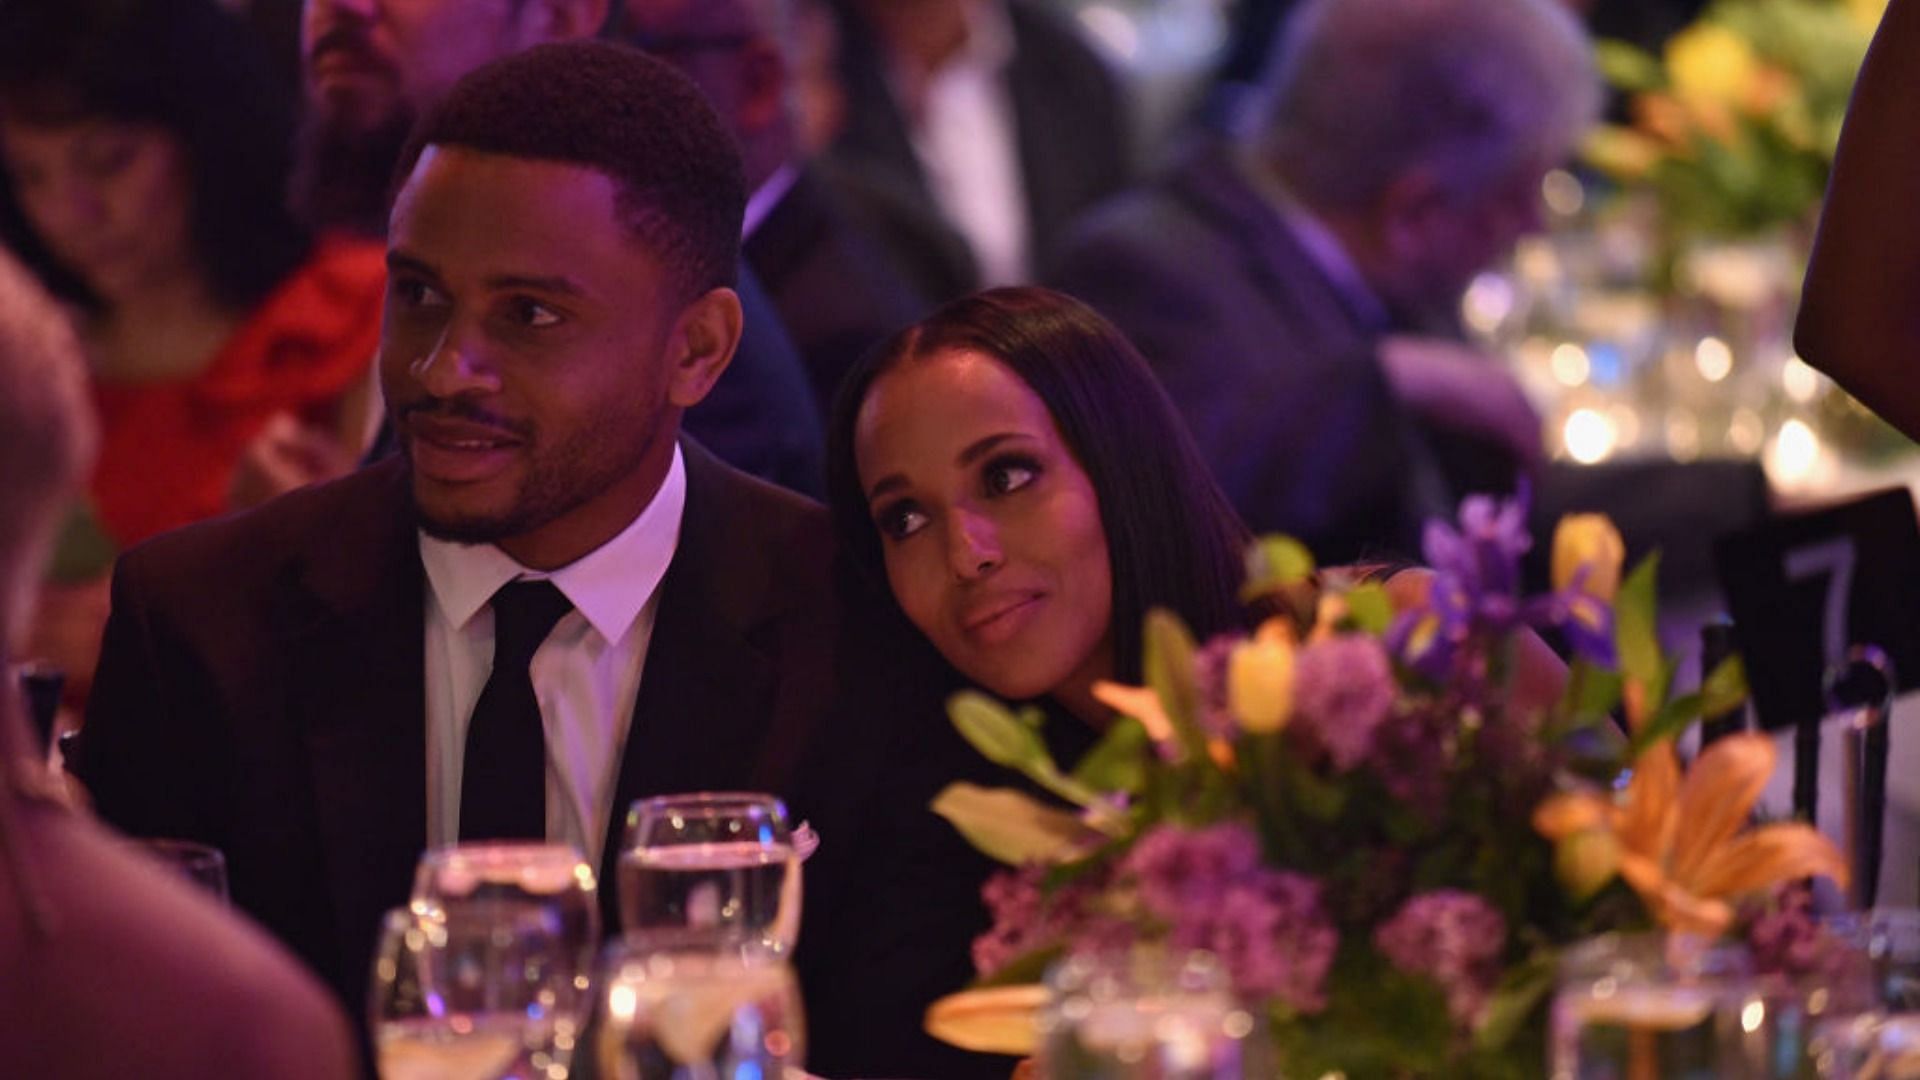 for second act asomugha made byword